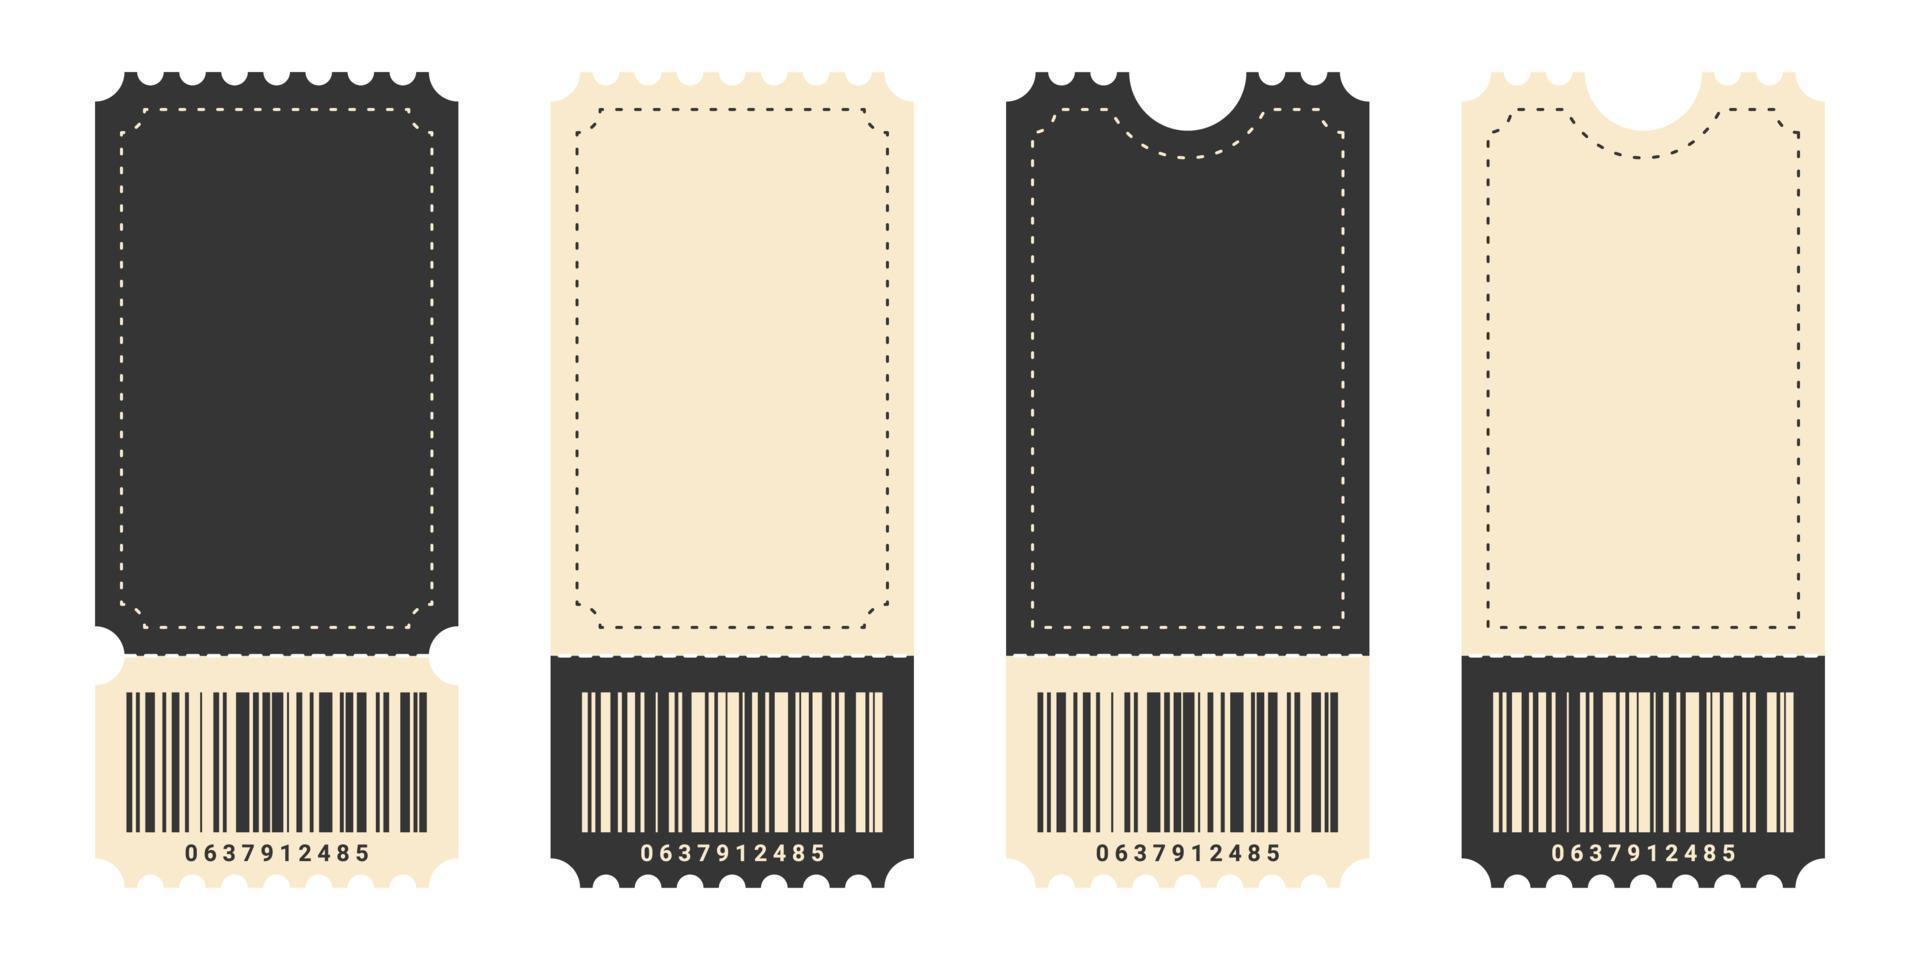 Ticket icons. Coupon icons. Different tickets with a barcode. Vector illustration